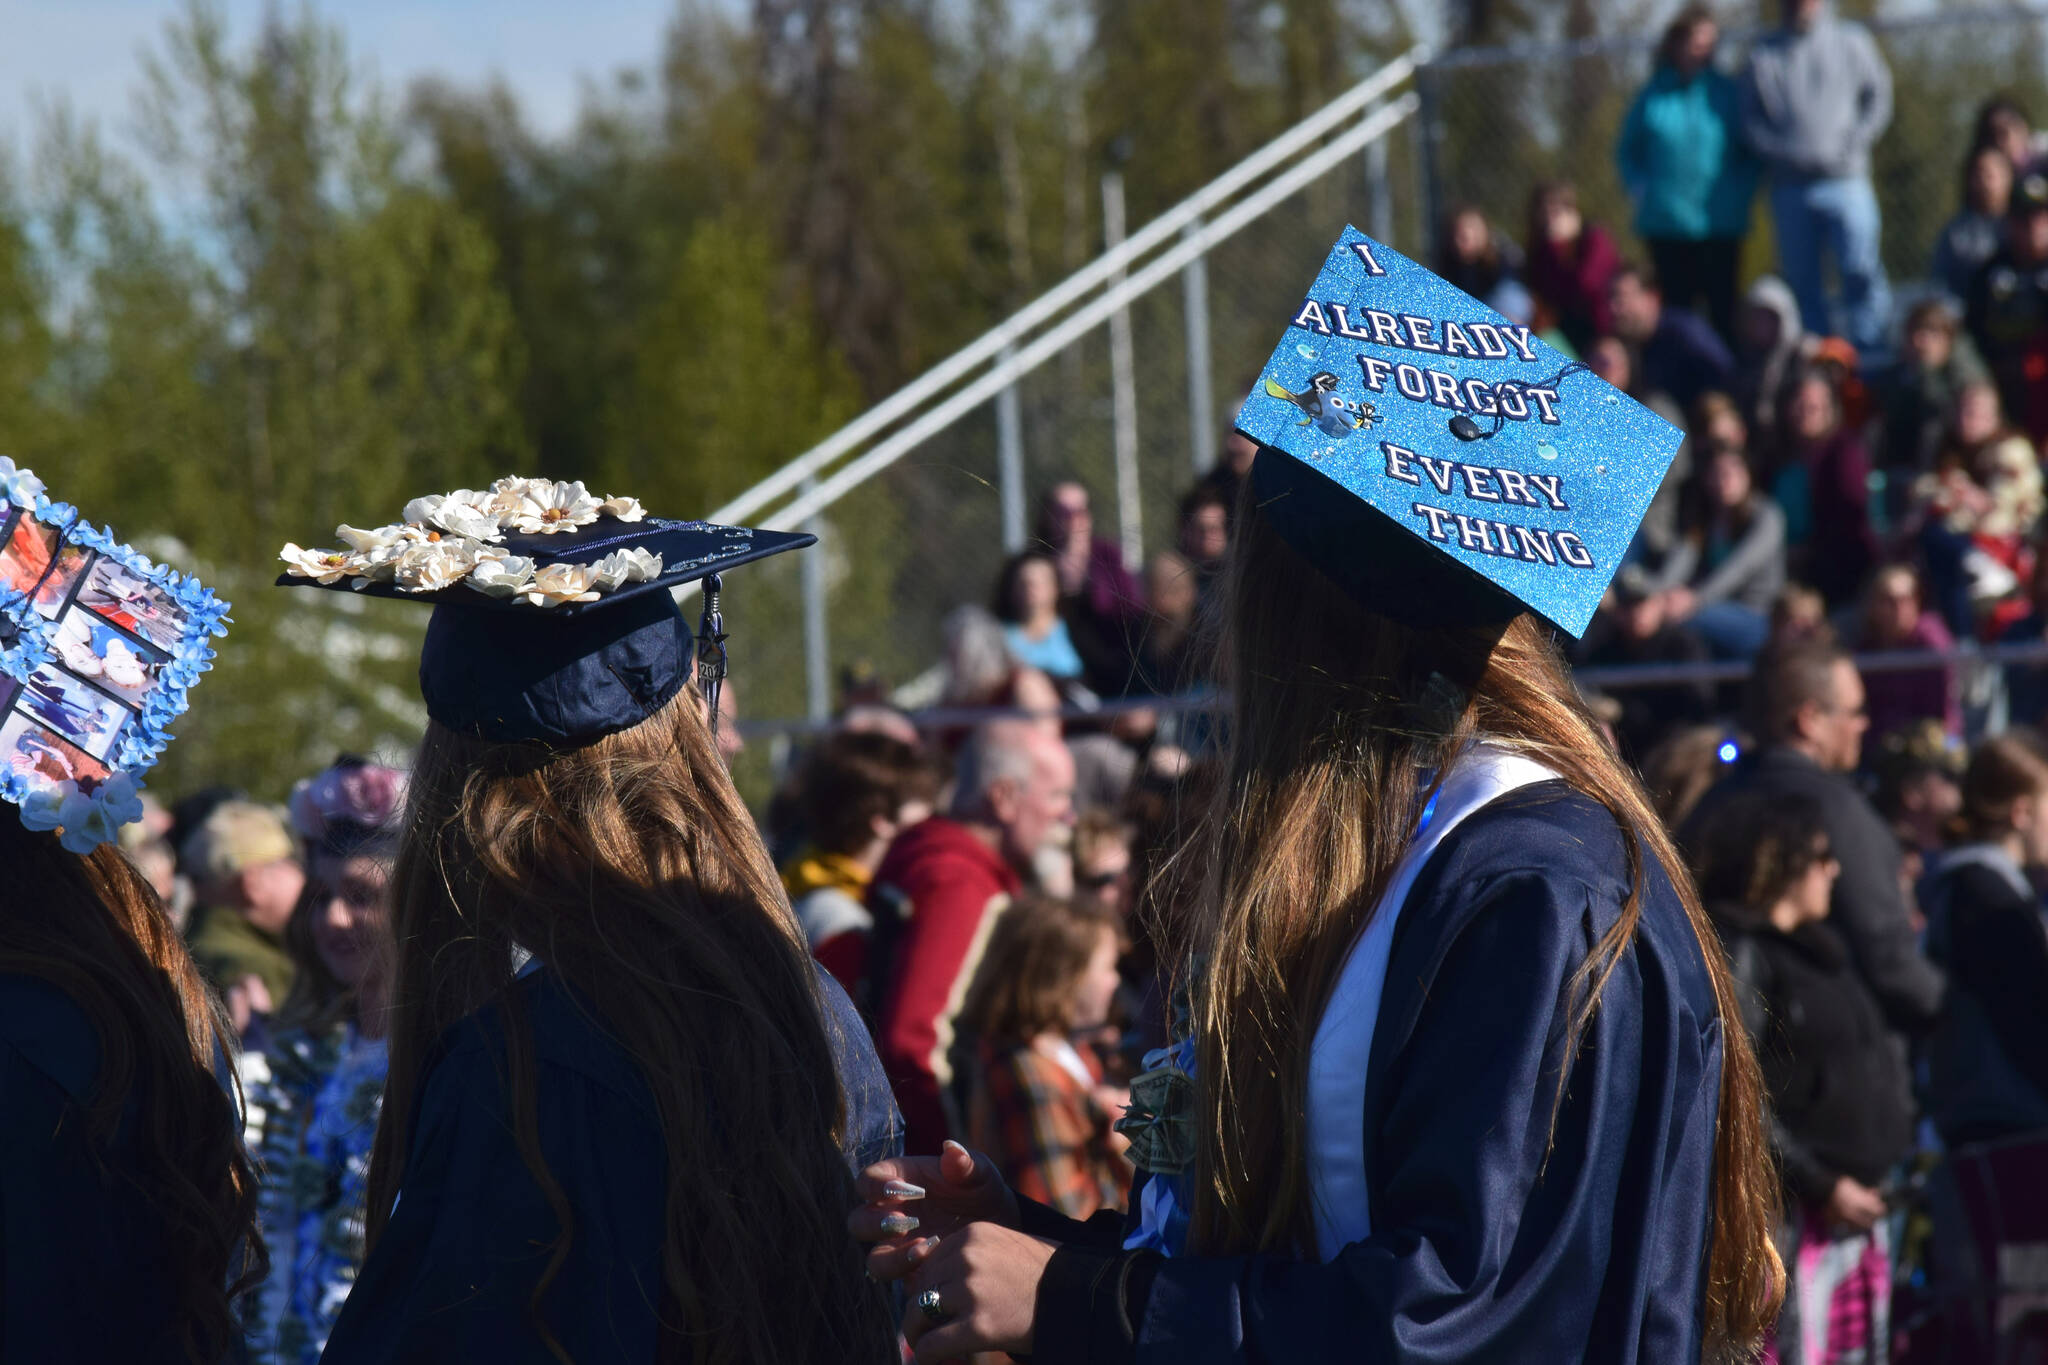 Graduates wear decorated caps during Soldotna High School’s commencement ceremony on Wednesday, May 18, 2022, in Soldotna, Alaska. (Ashlyn O’Hara/Peninsula Clarion)